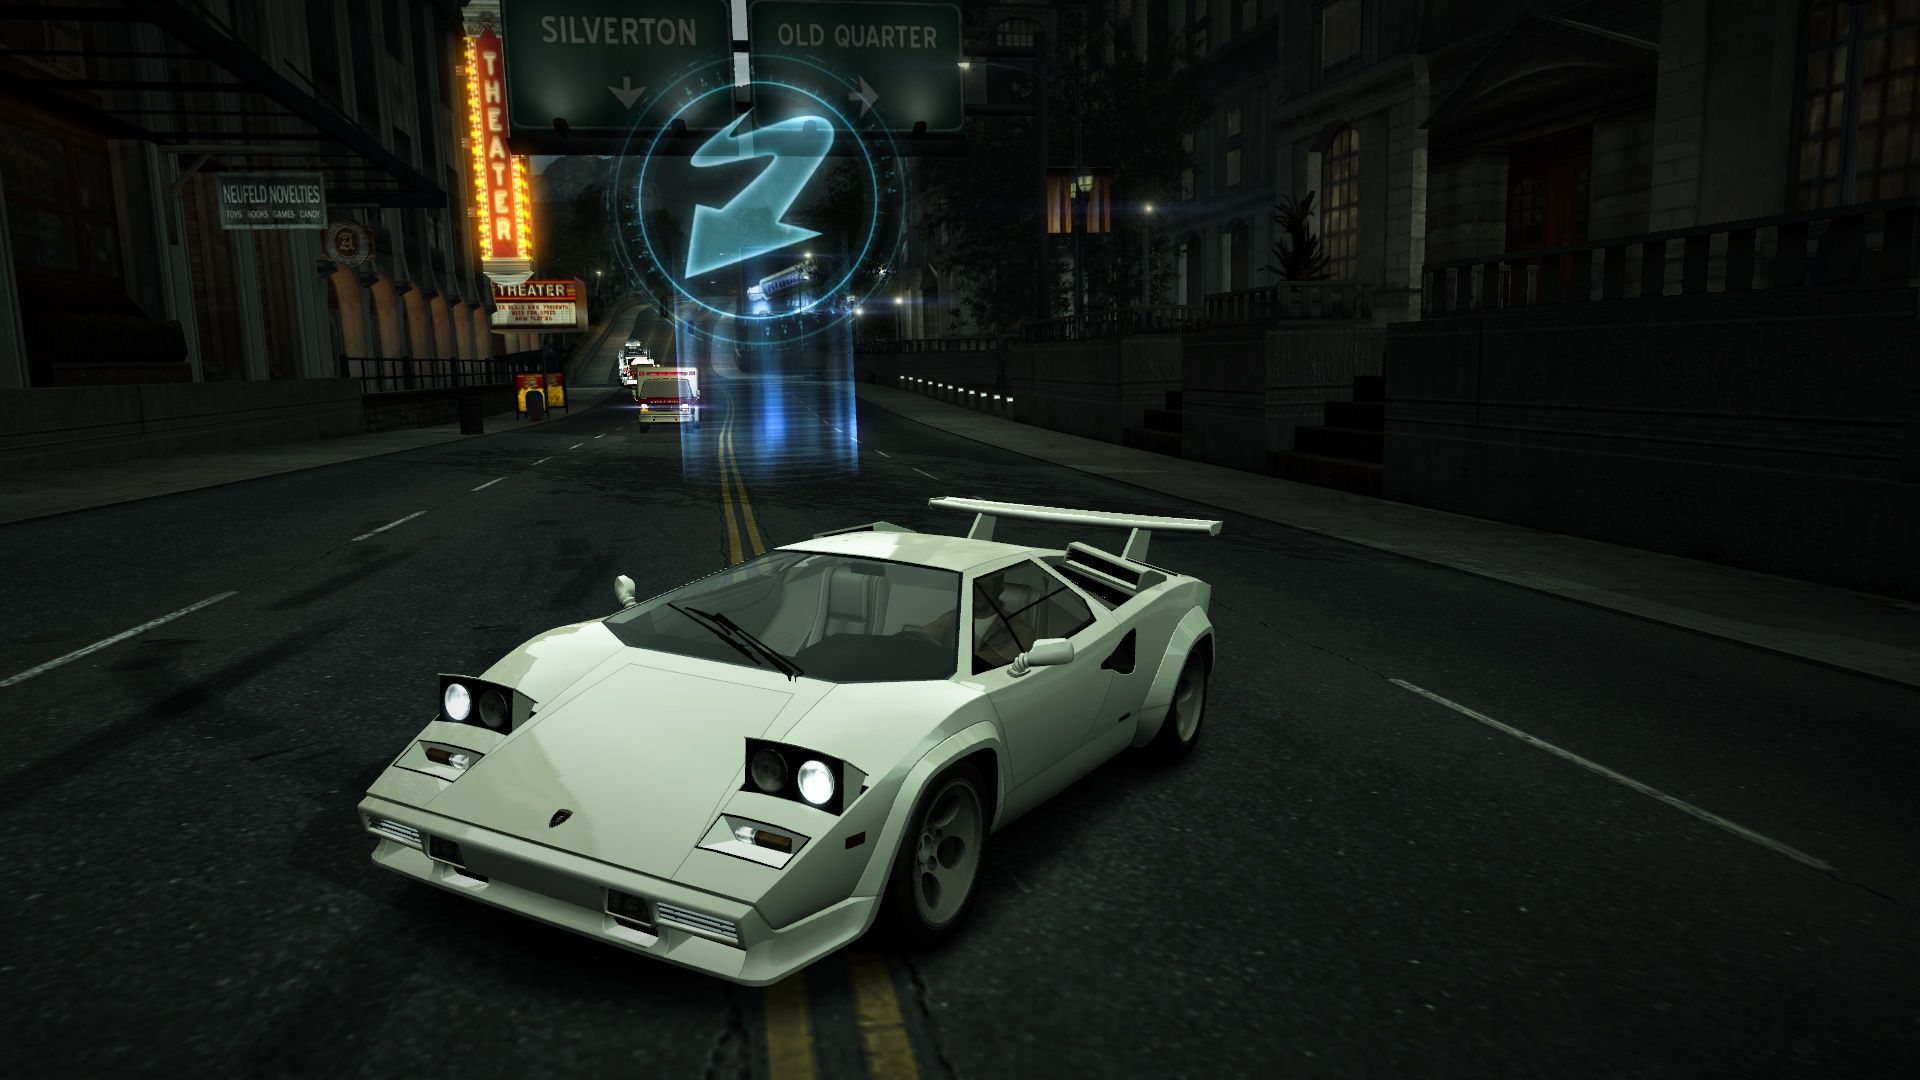 Need For Speed World Lamborghini Countach 5000QV - Opened pop-up headlights version #2